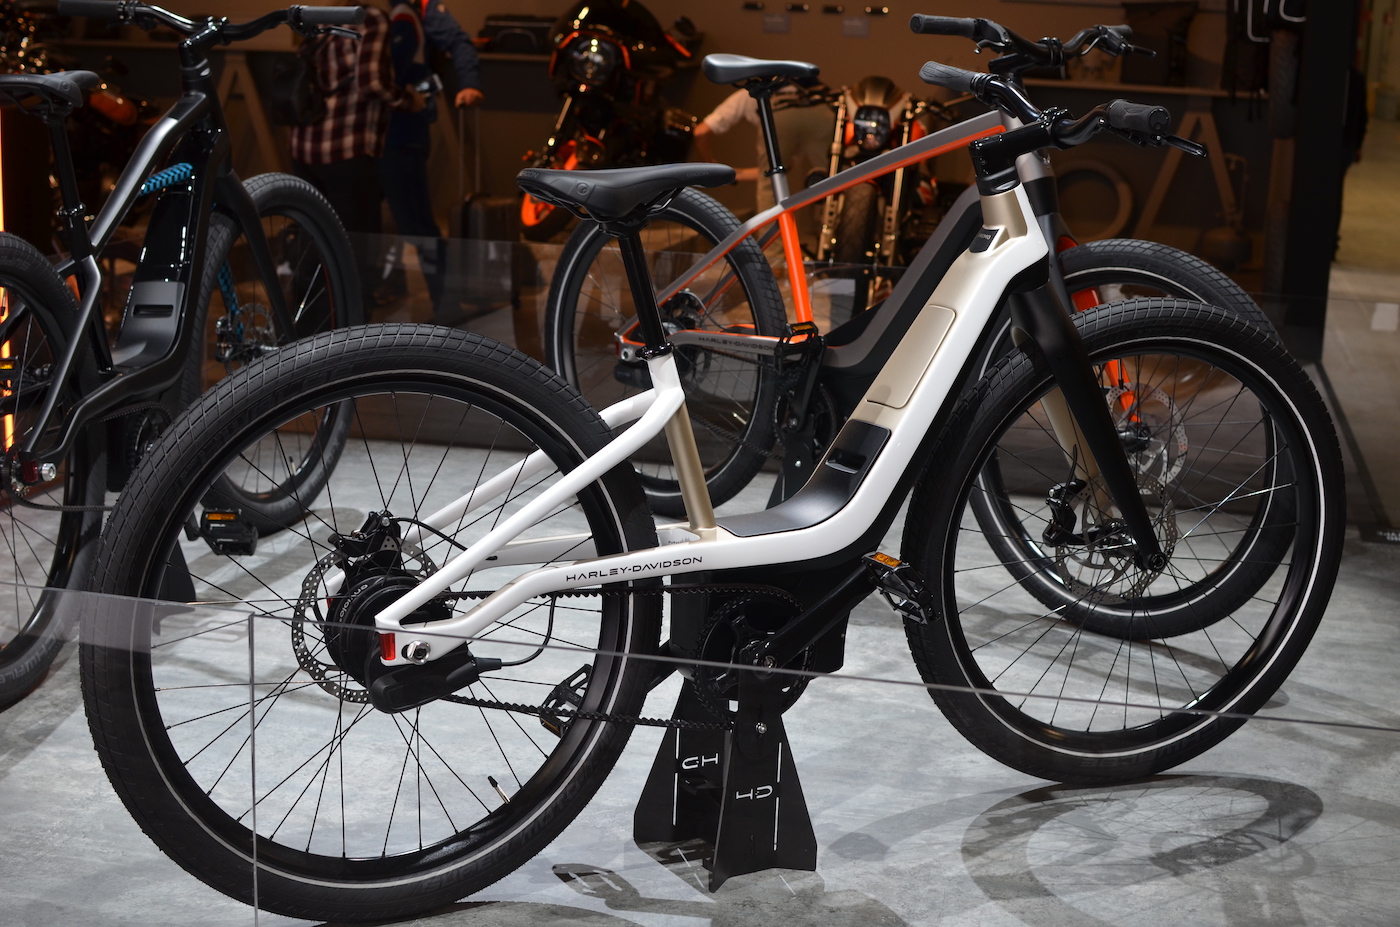 Harley-Davidson electric bicycles get their first public debut